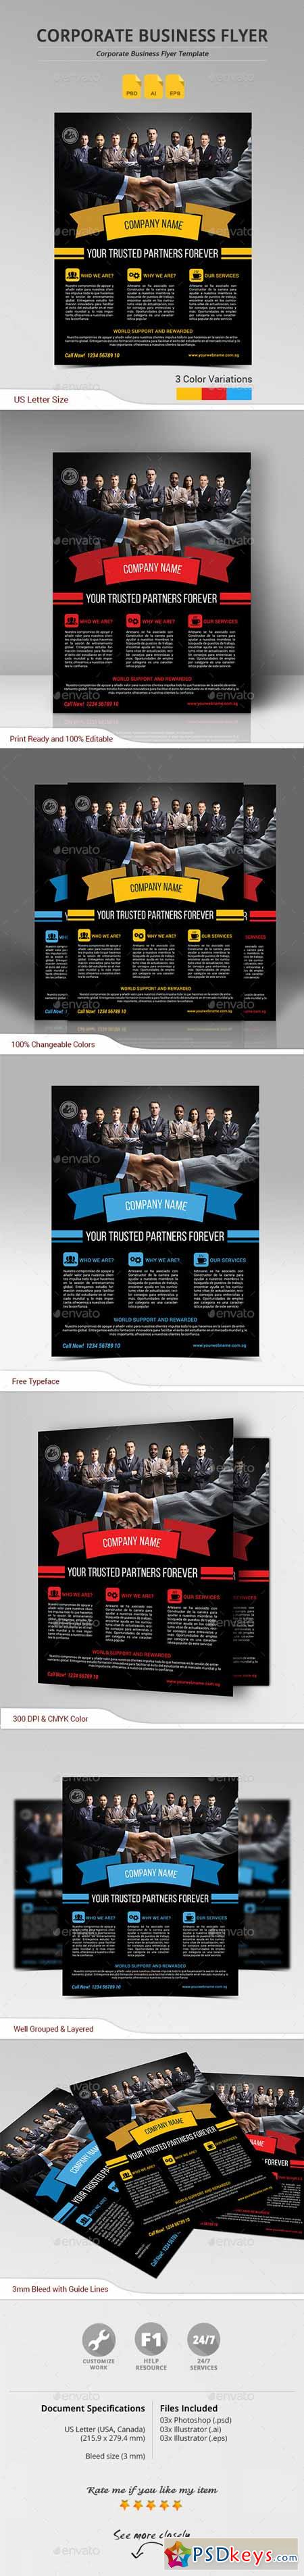 Corporate Business Flyer 10946984